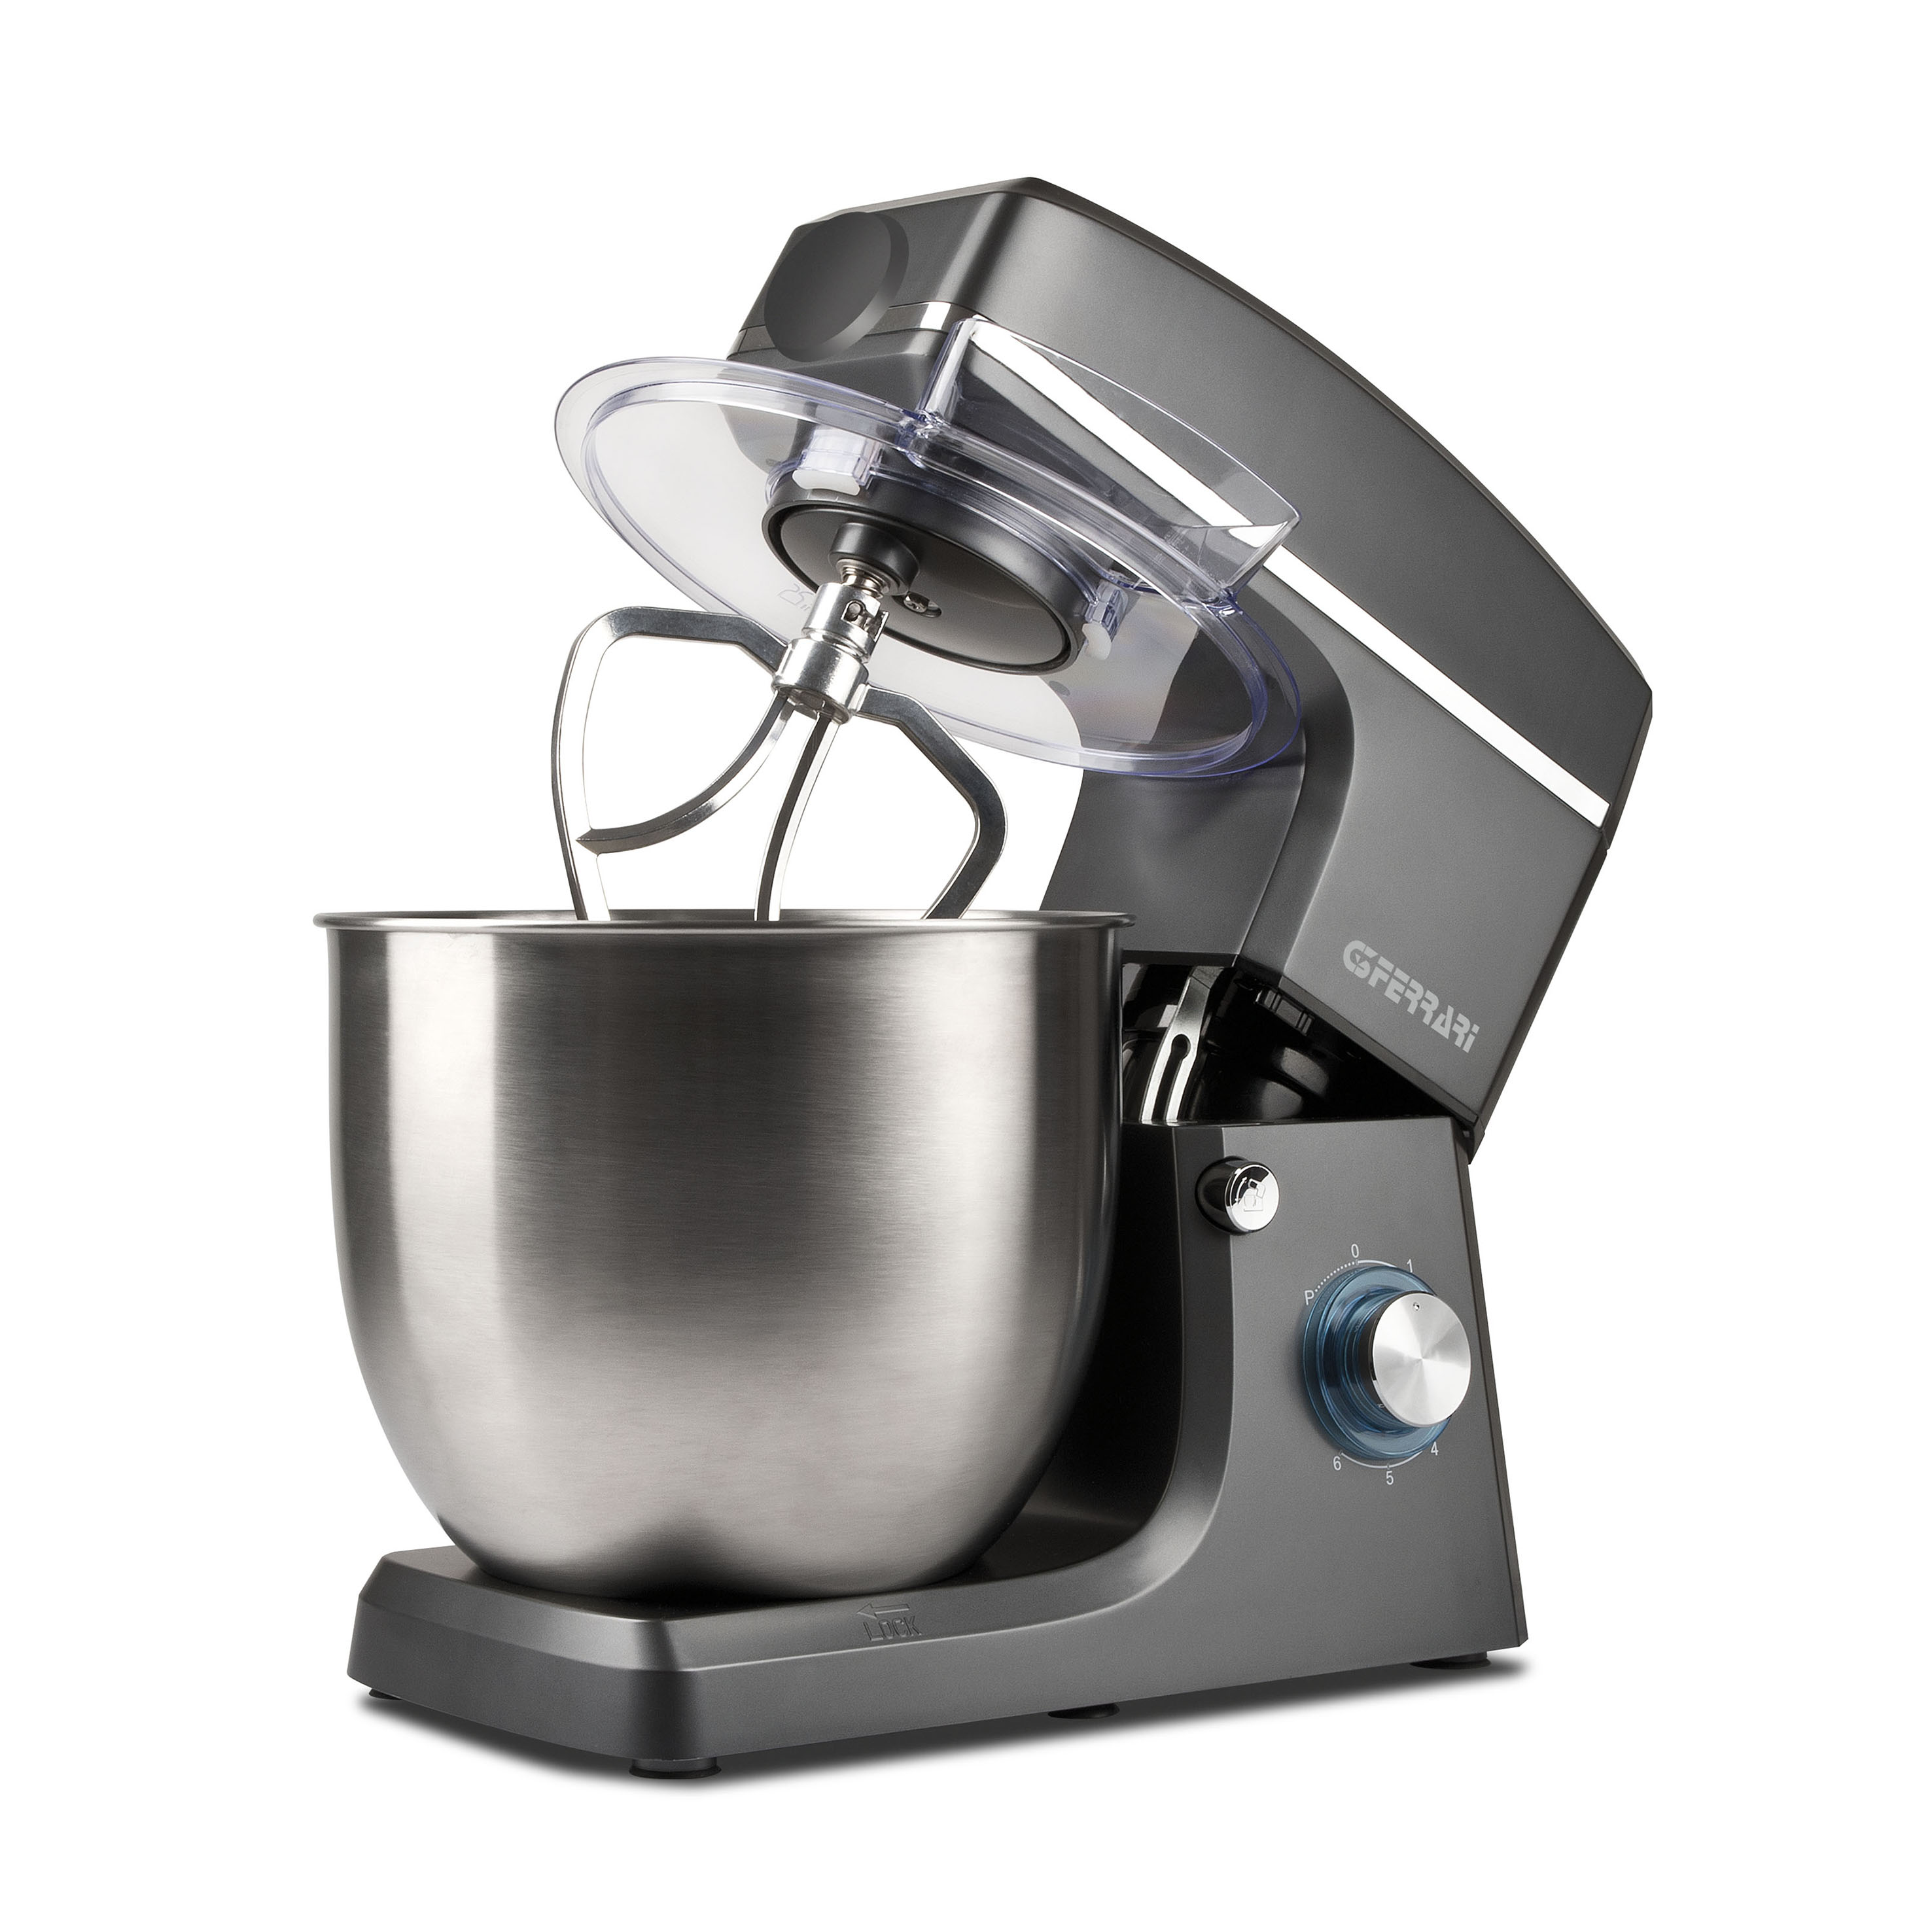 Pastaio 10&Lode G20120 G20120 Stand mixer